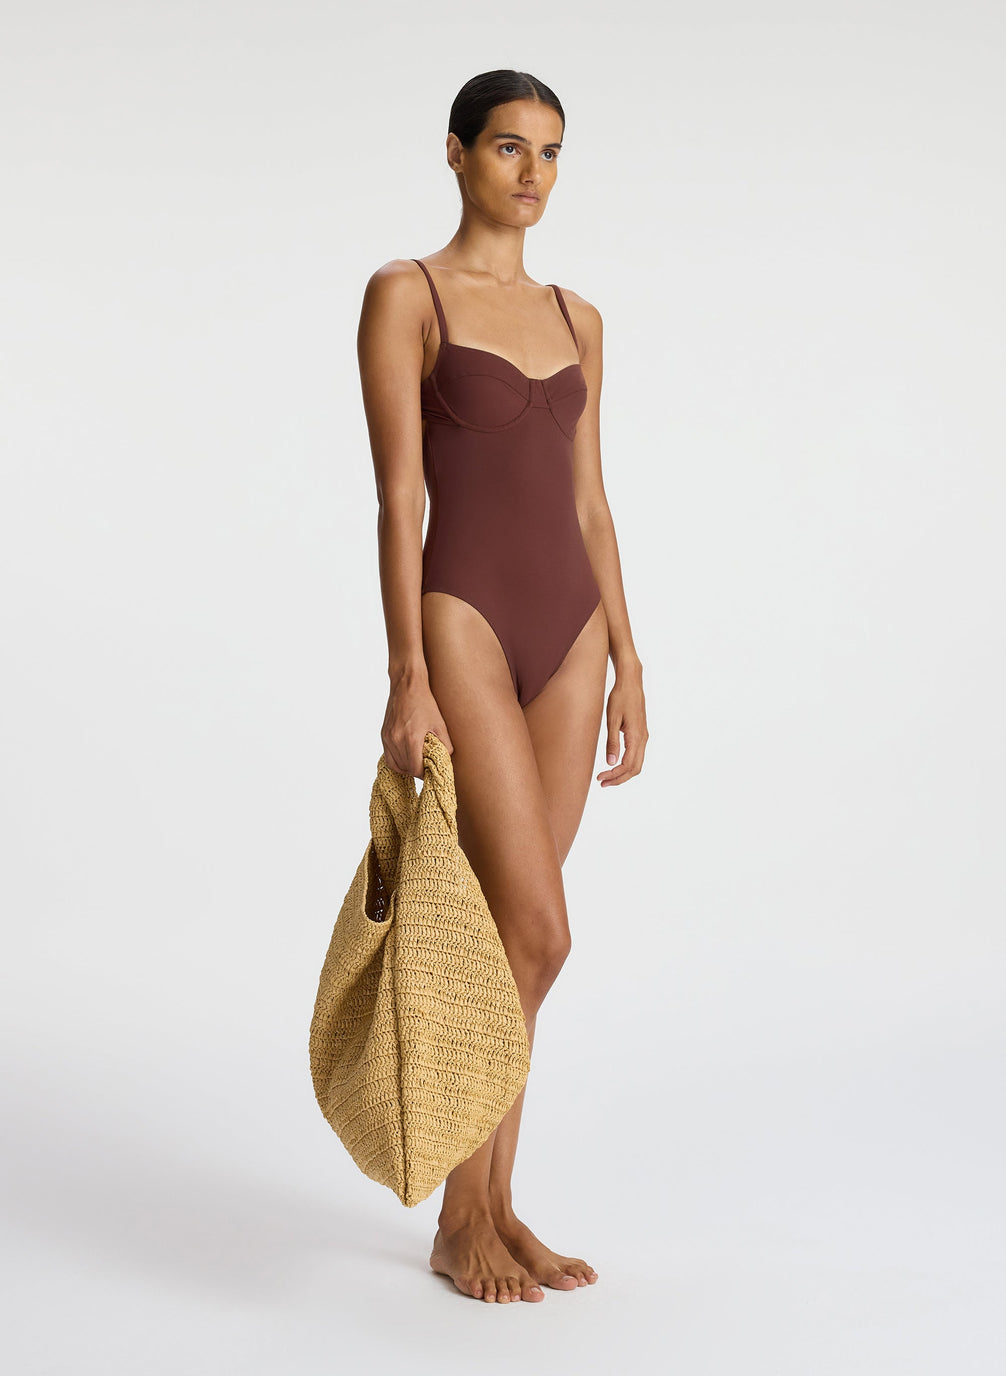 side view of woman wearing brown one piece swimsuit